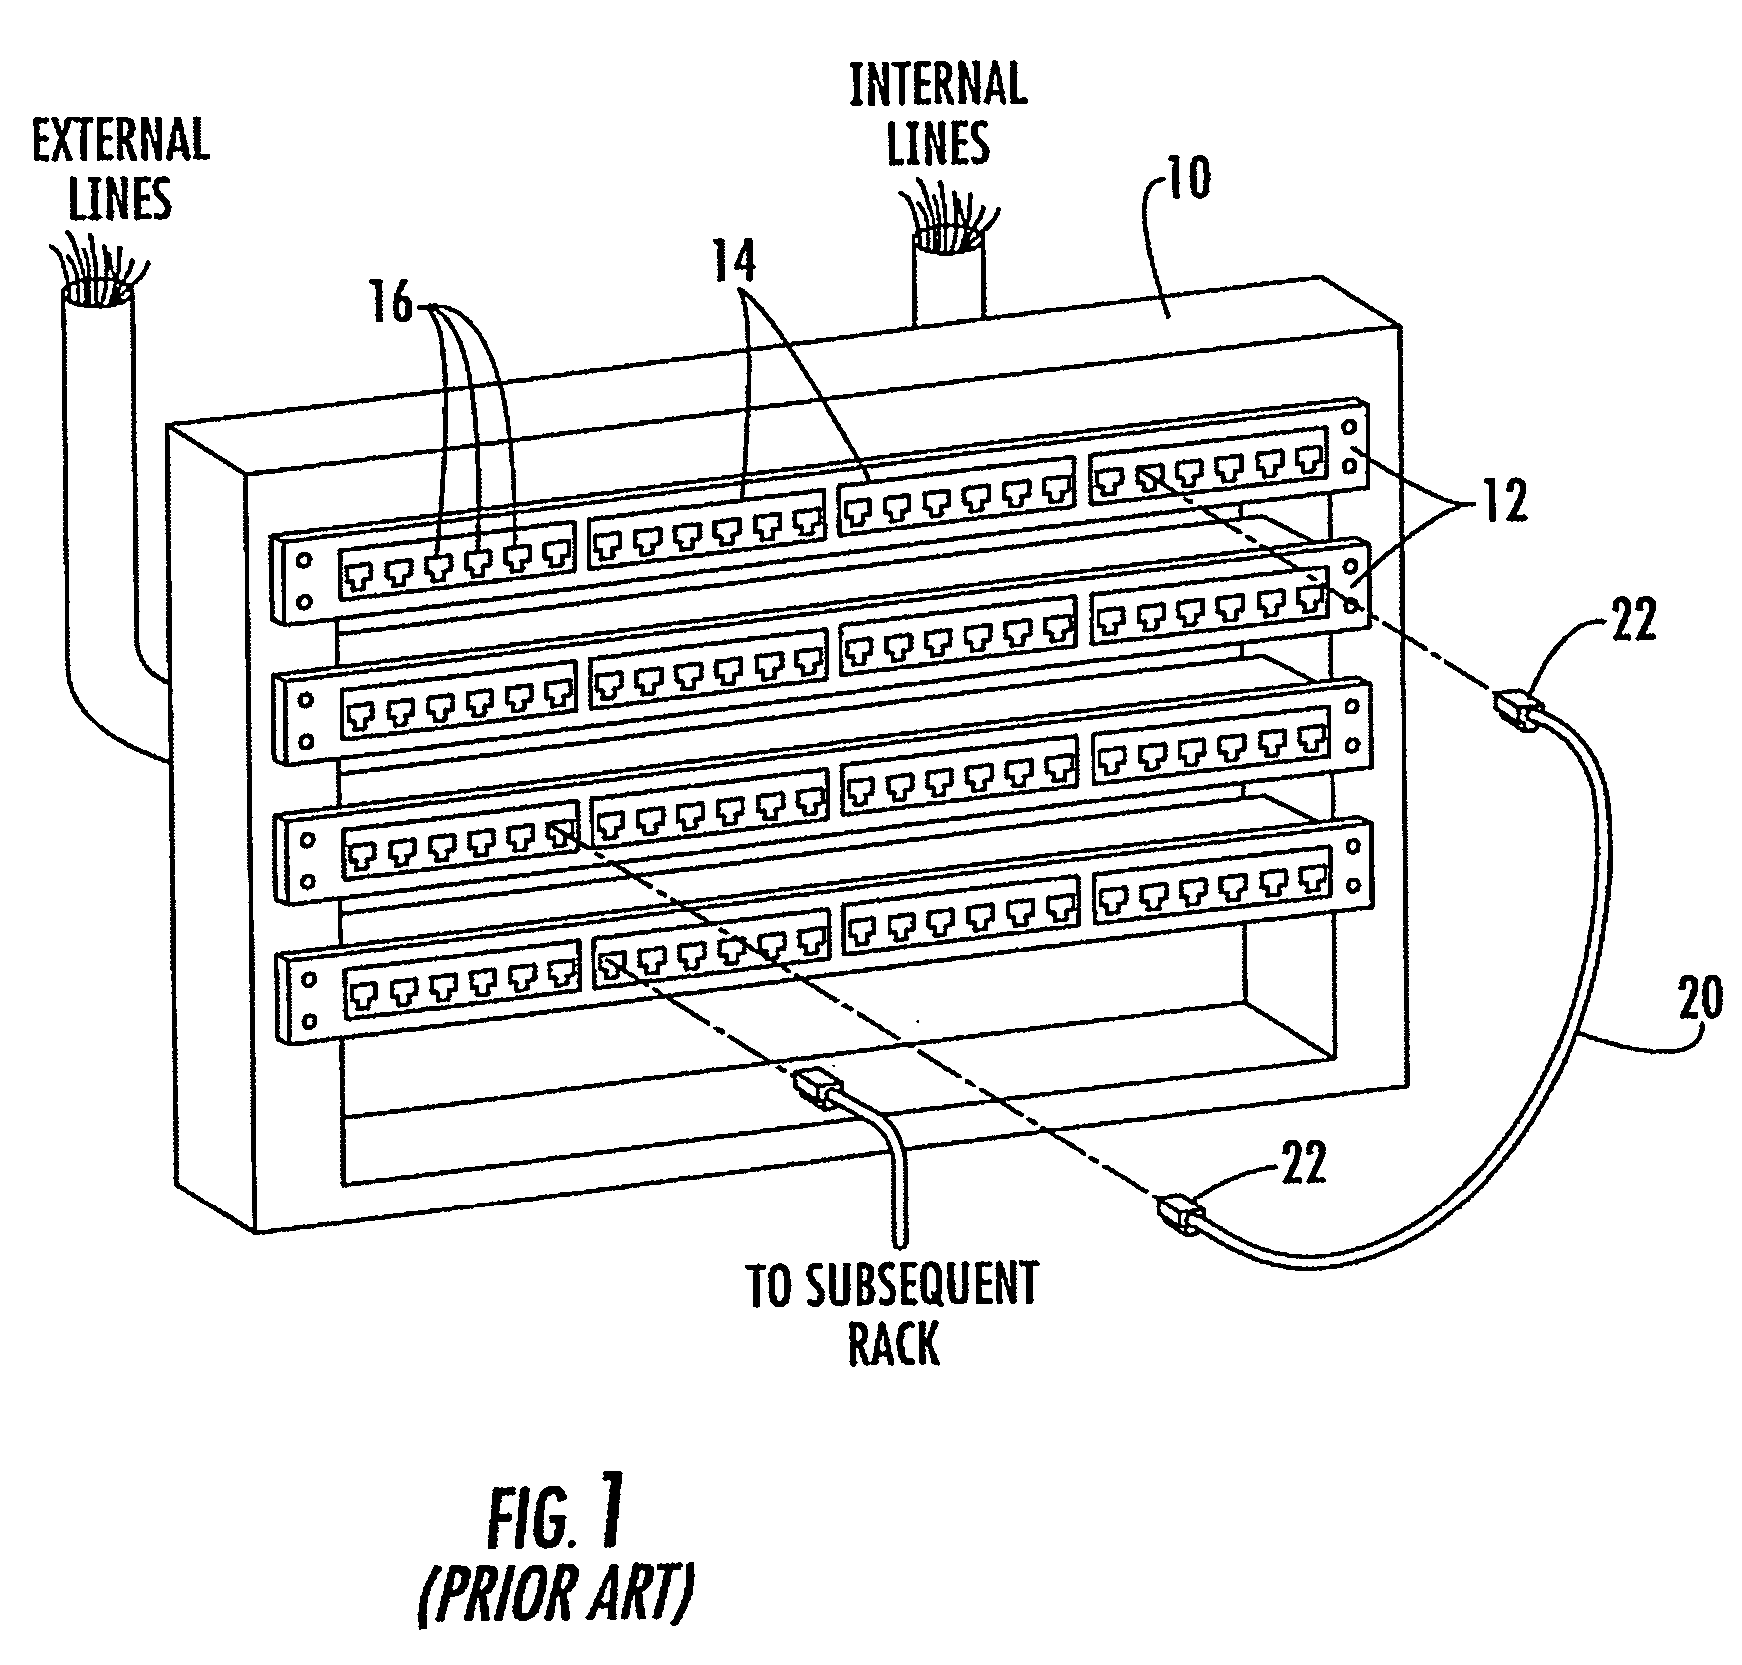 Telecommunications patching system that utilizes RFID tags to detect and identify patch cord interconnections